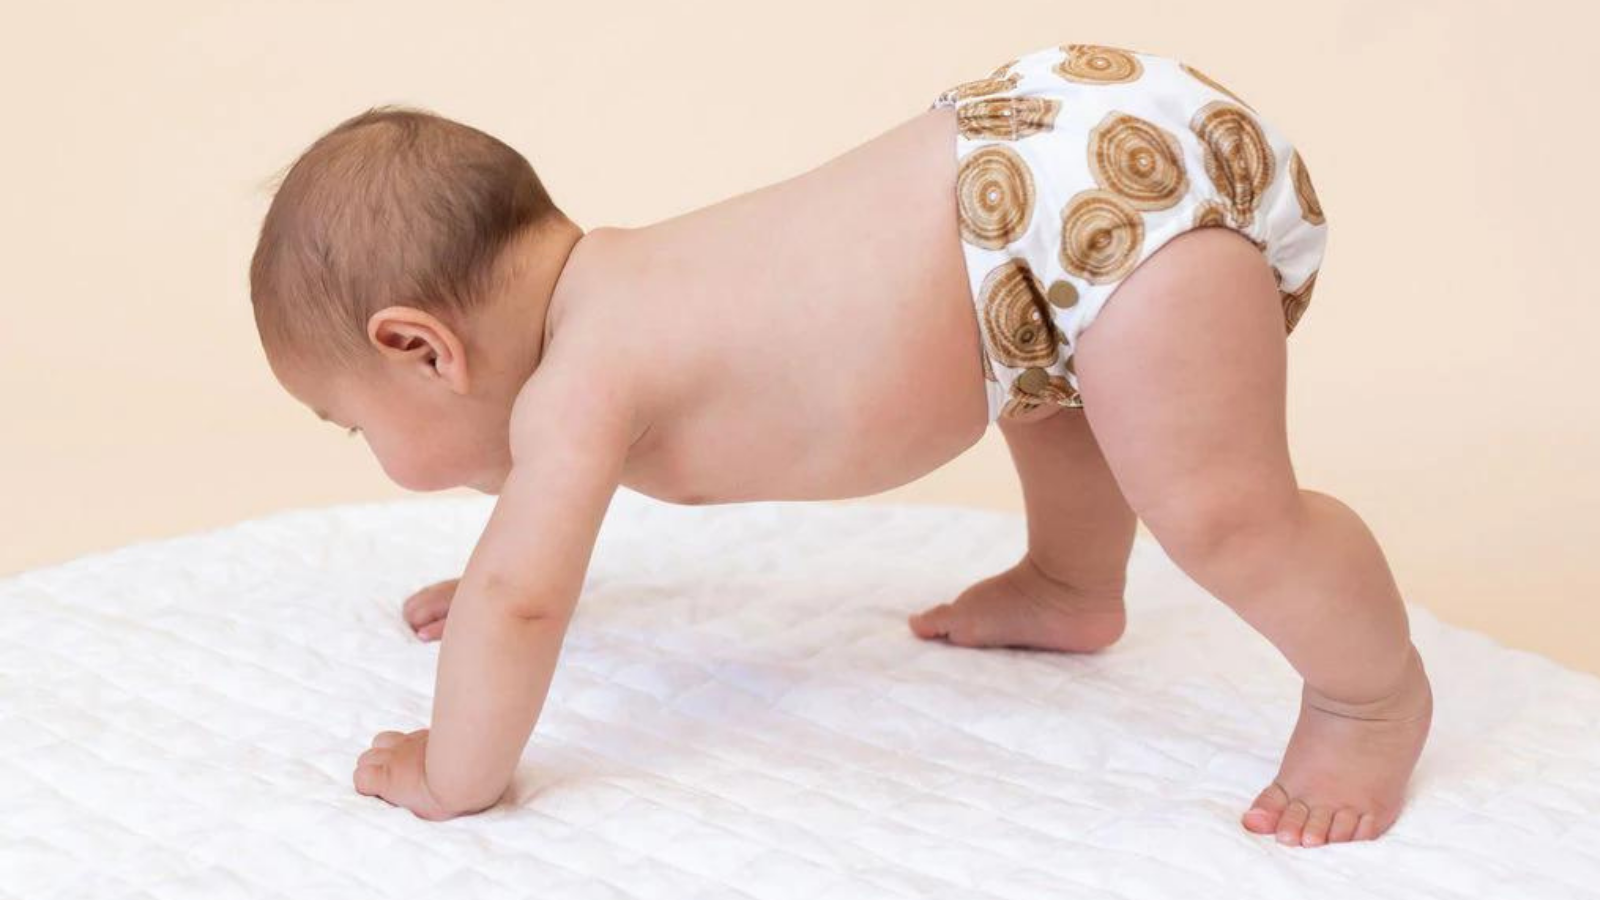 Image of a baby wearing a Bare and Boho Soft Cover Nappy in the Gugin Bujerum design